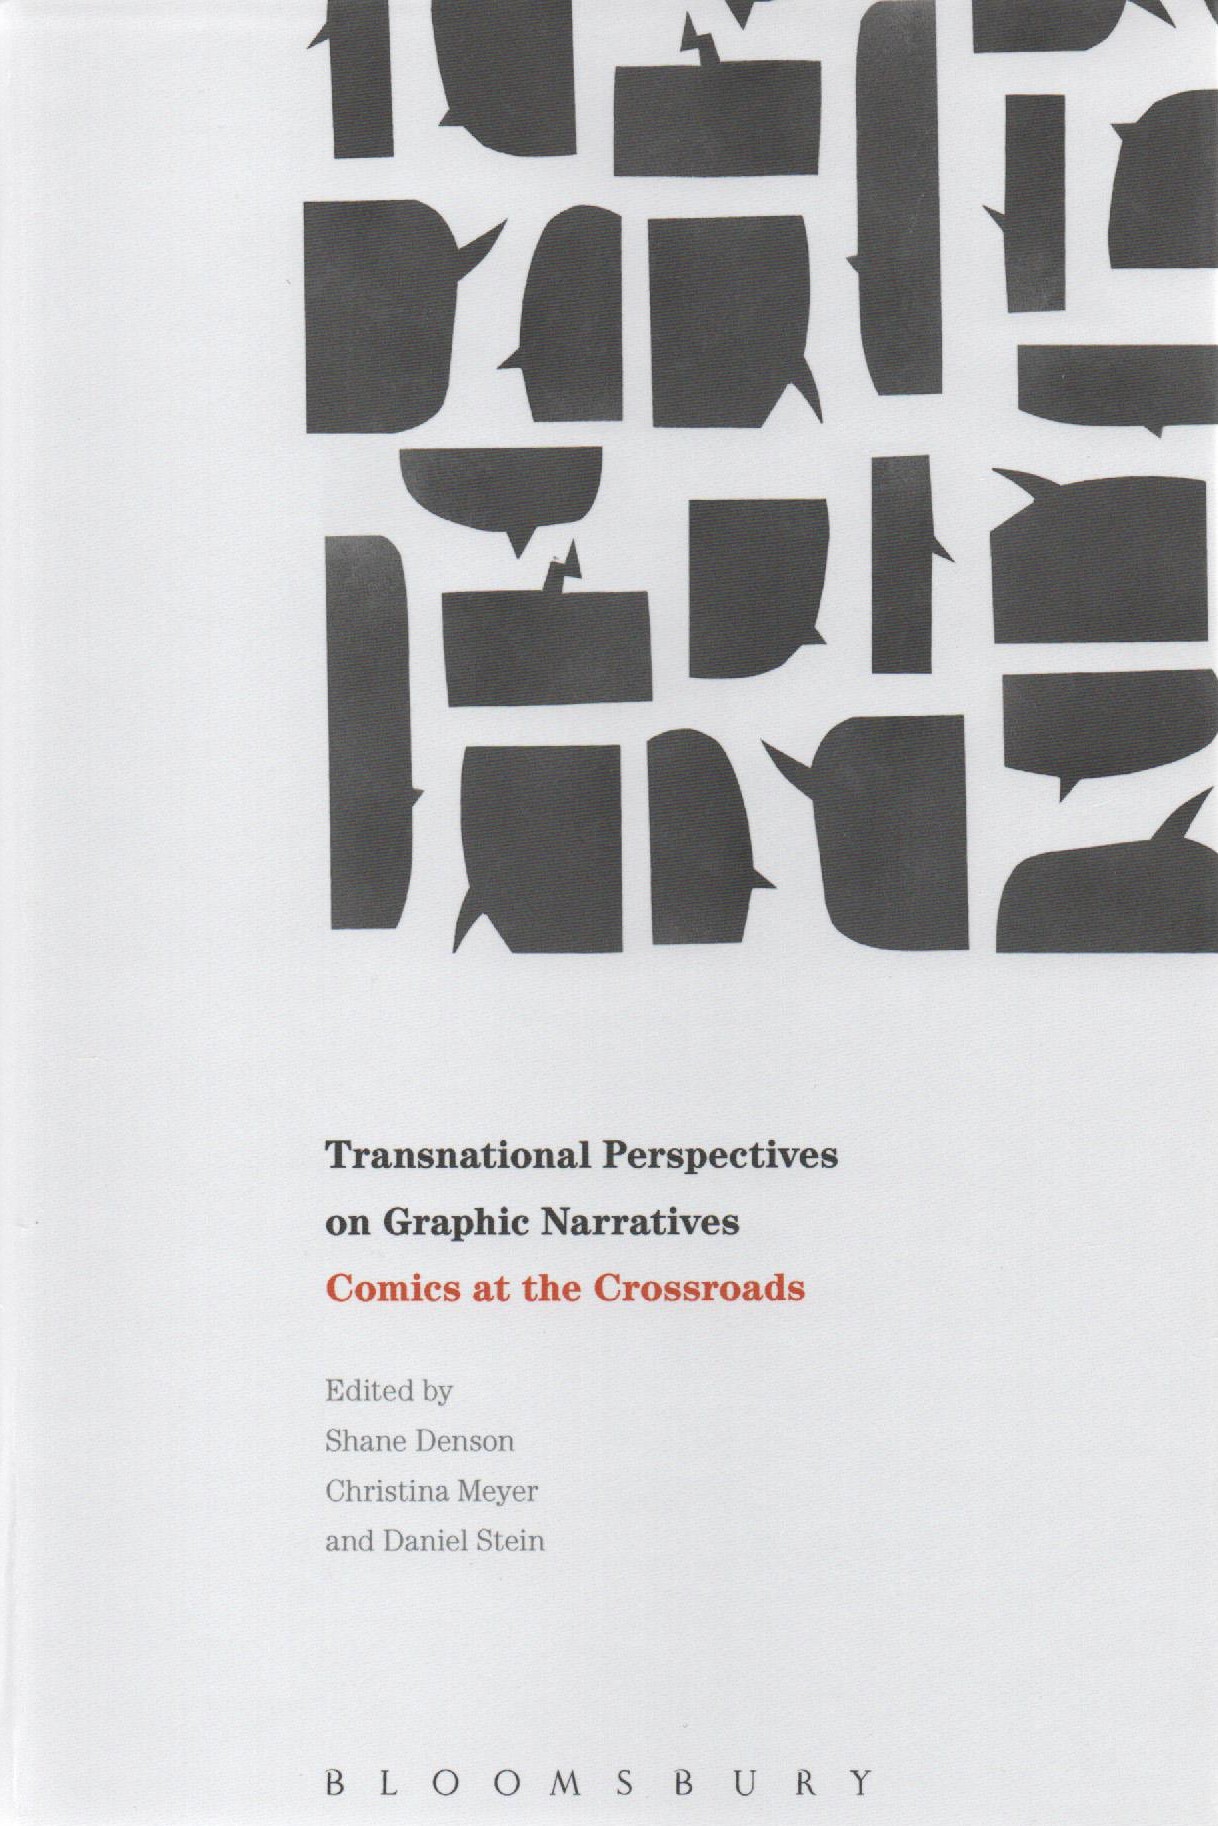 Transnational Perspectives